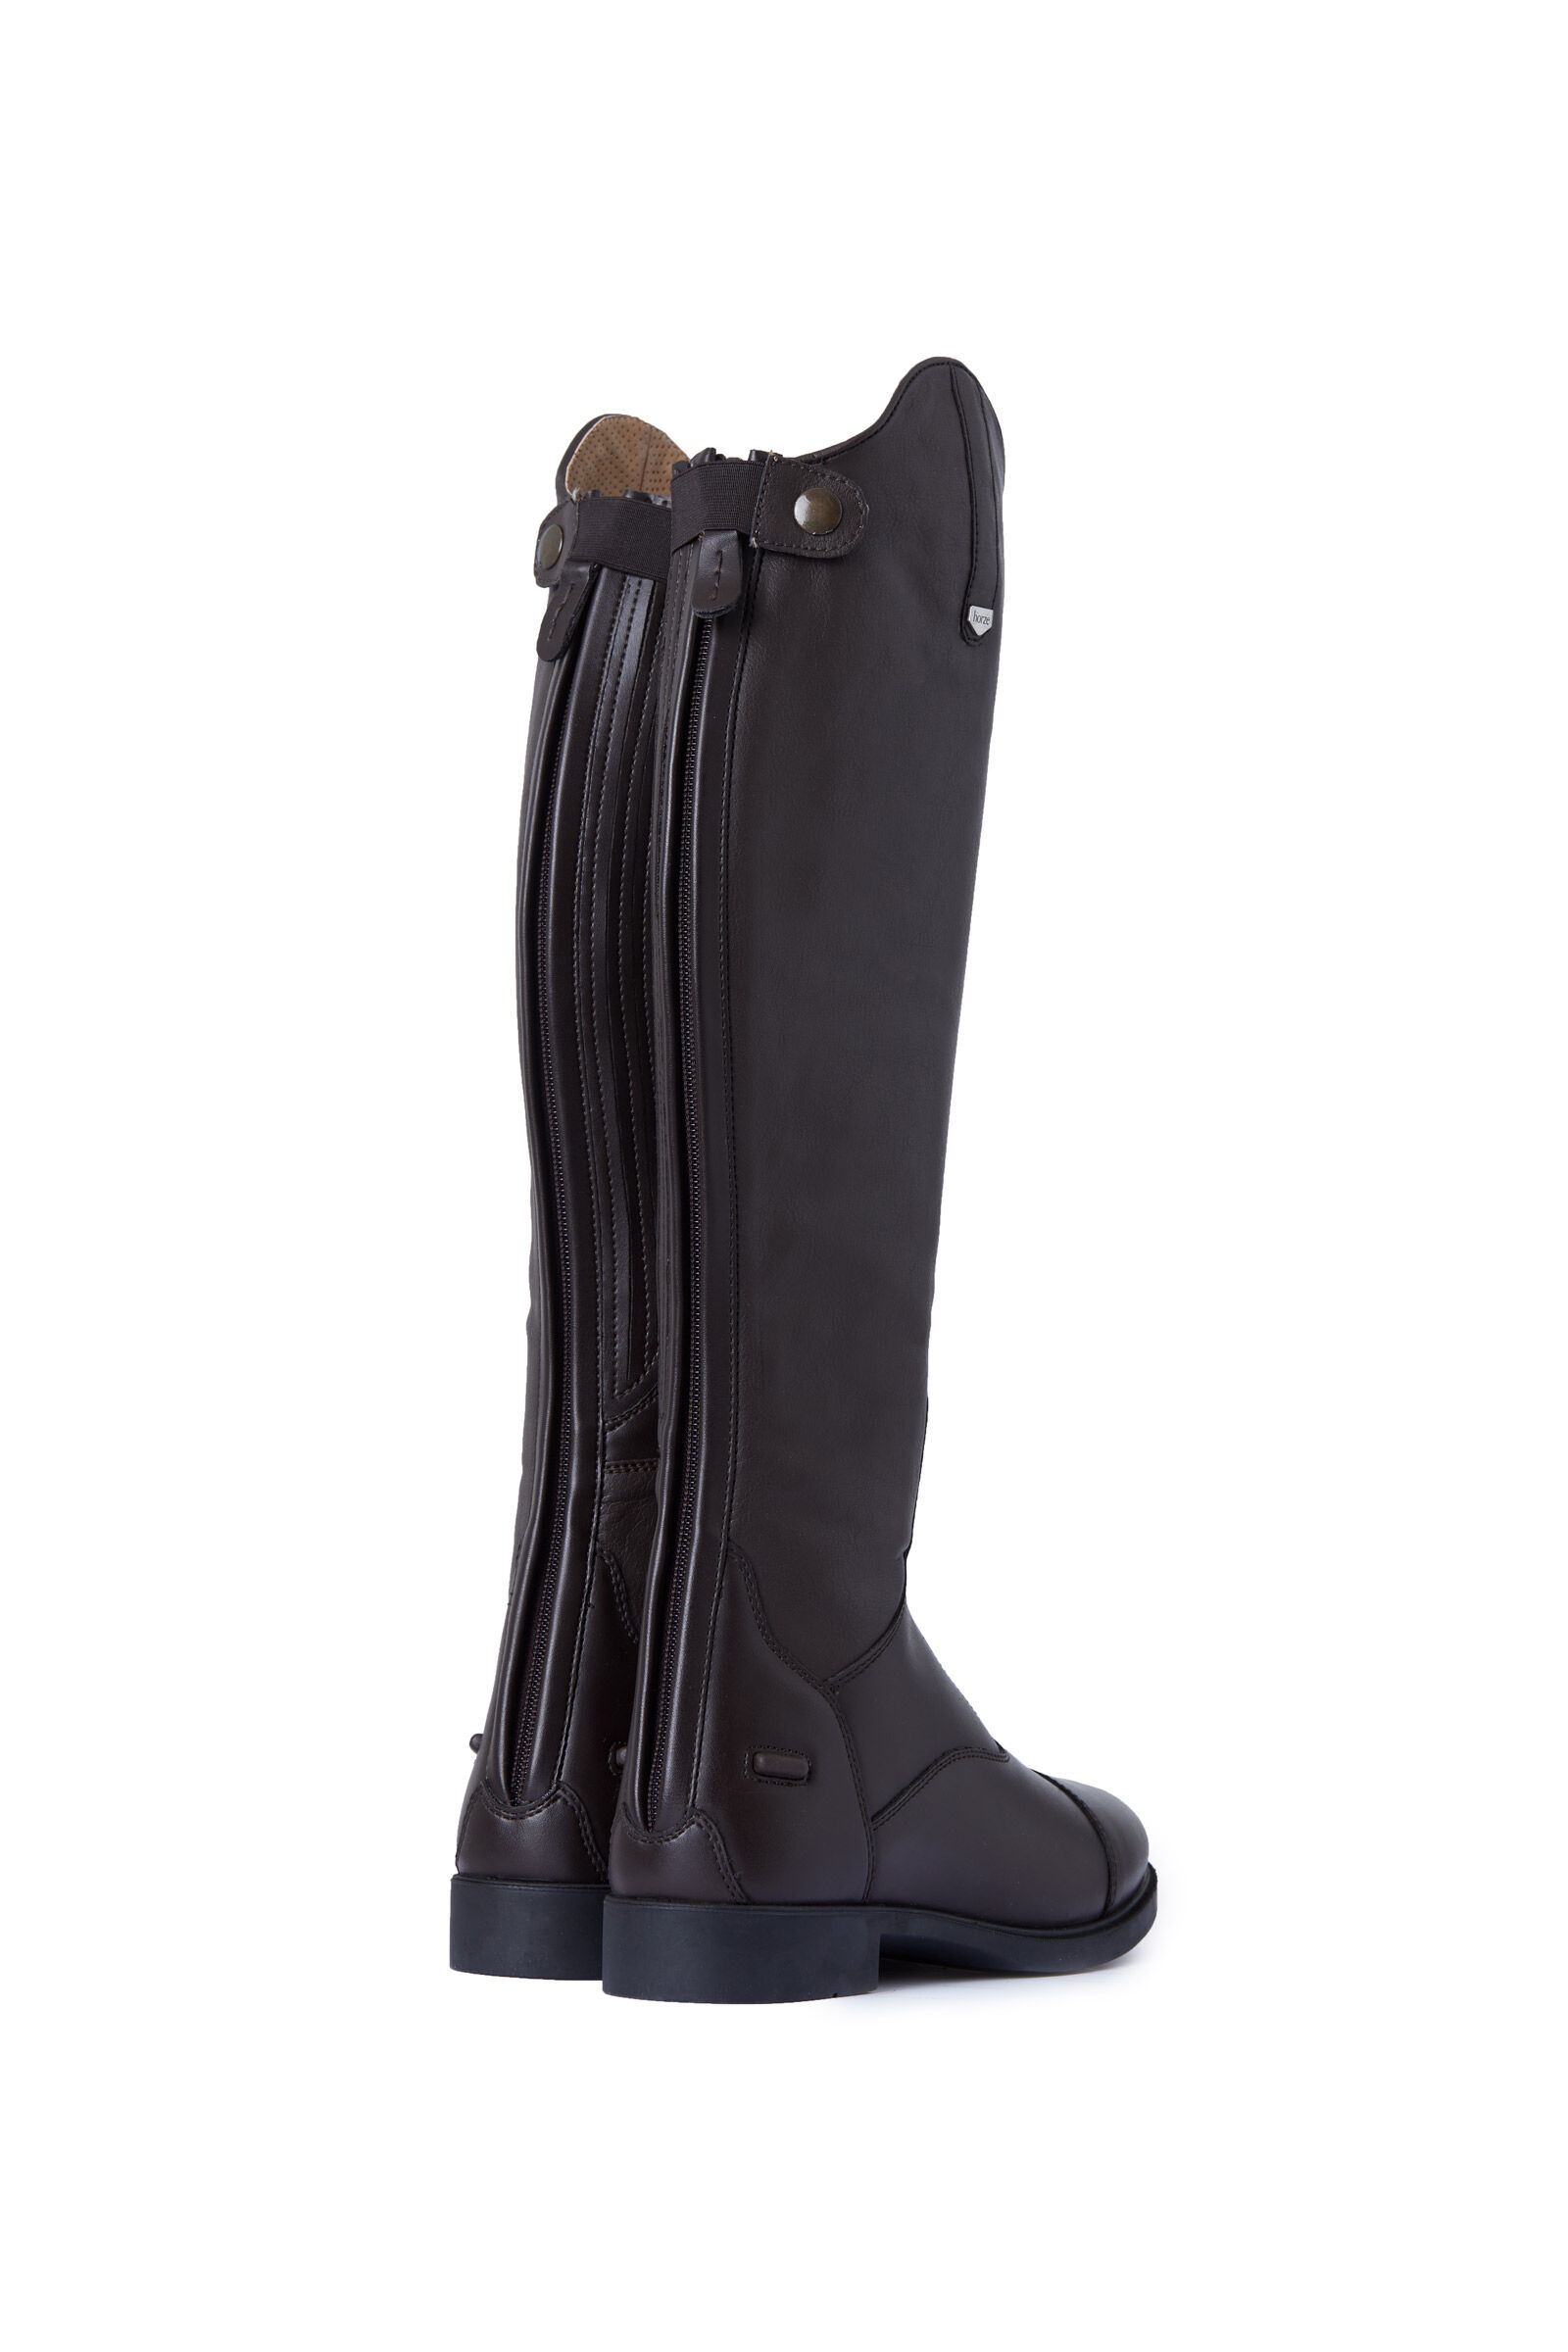 Horze Rover Synthetic Field Tall Riding Boots with Back Zip and Inner Elastic 